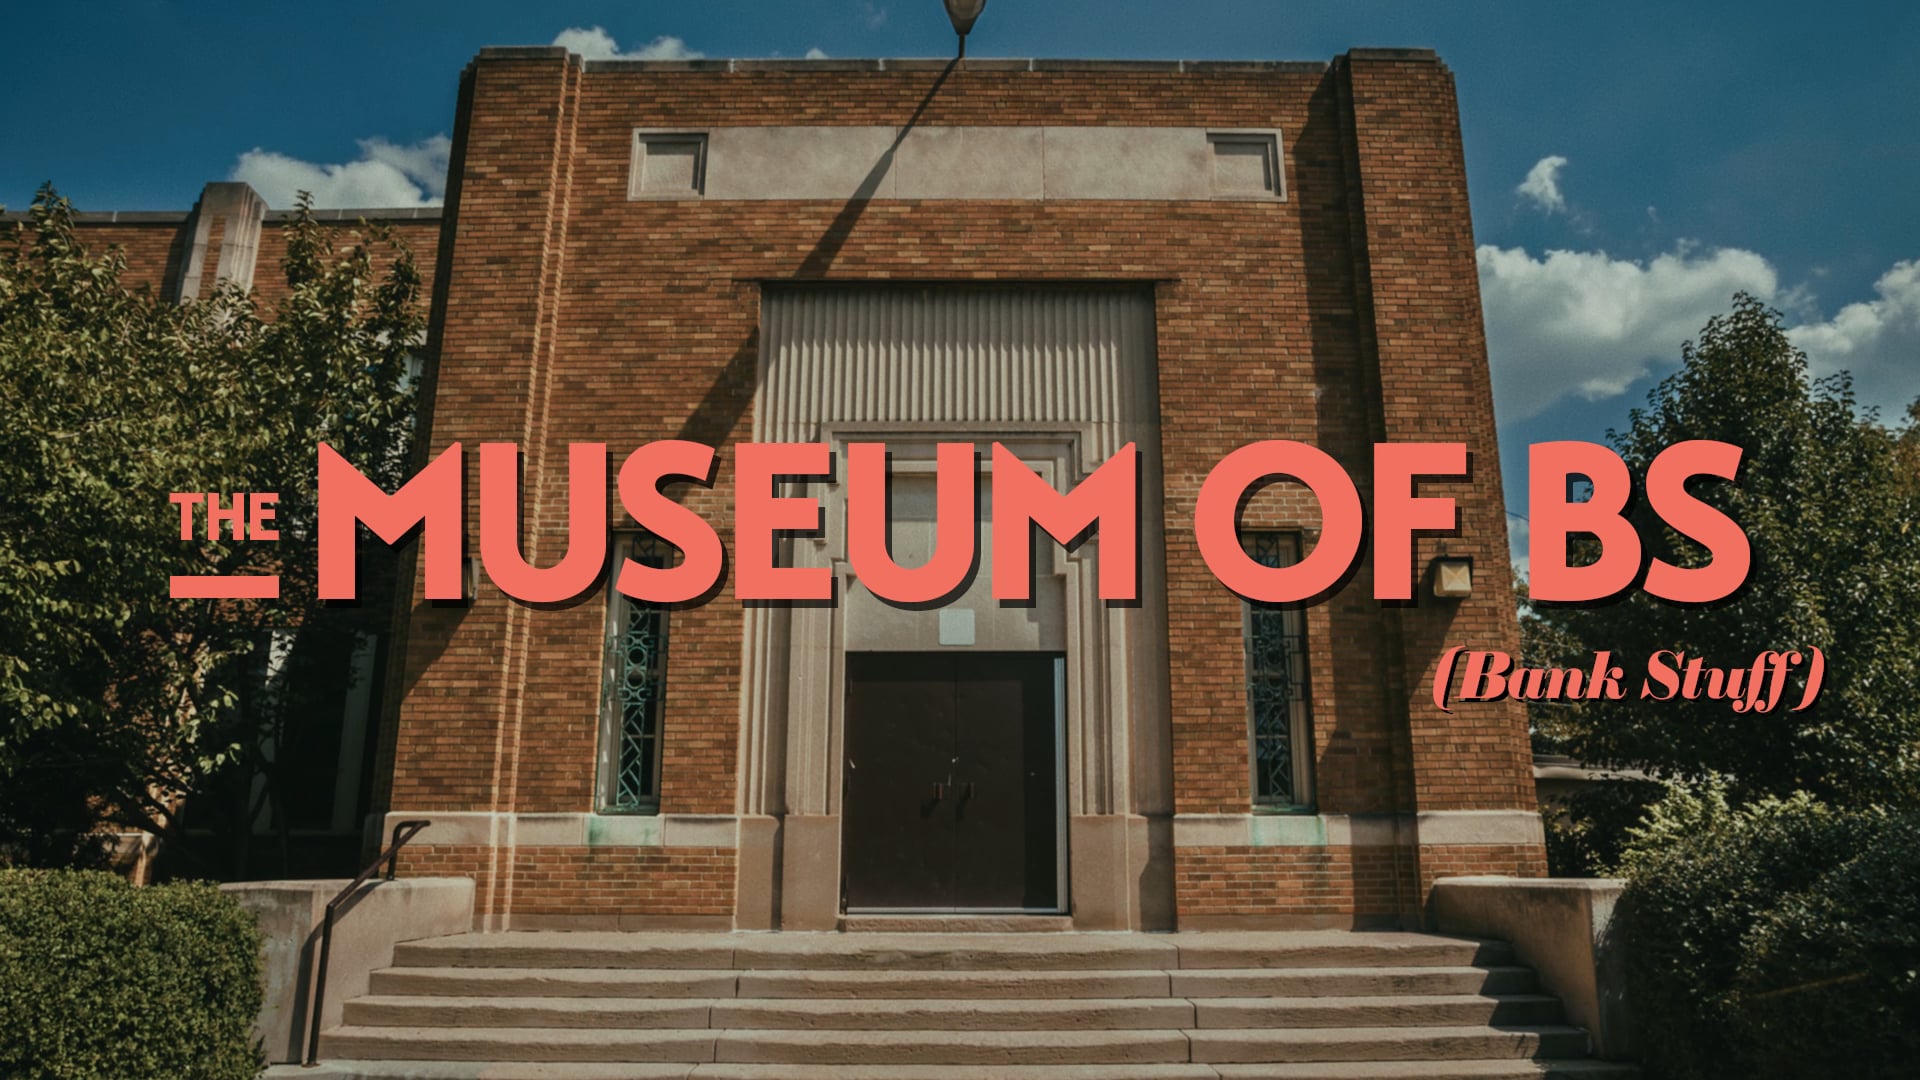 The Museum of BS